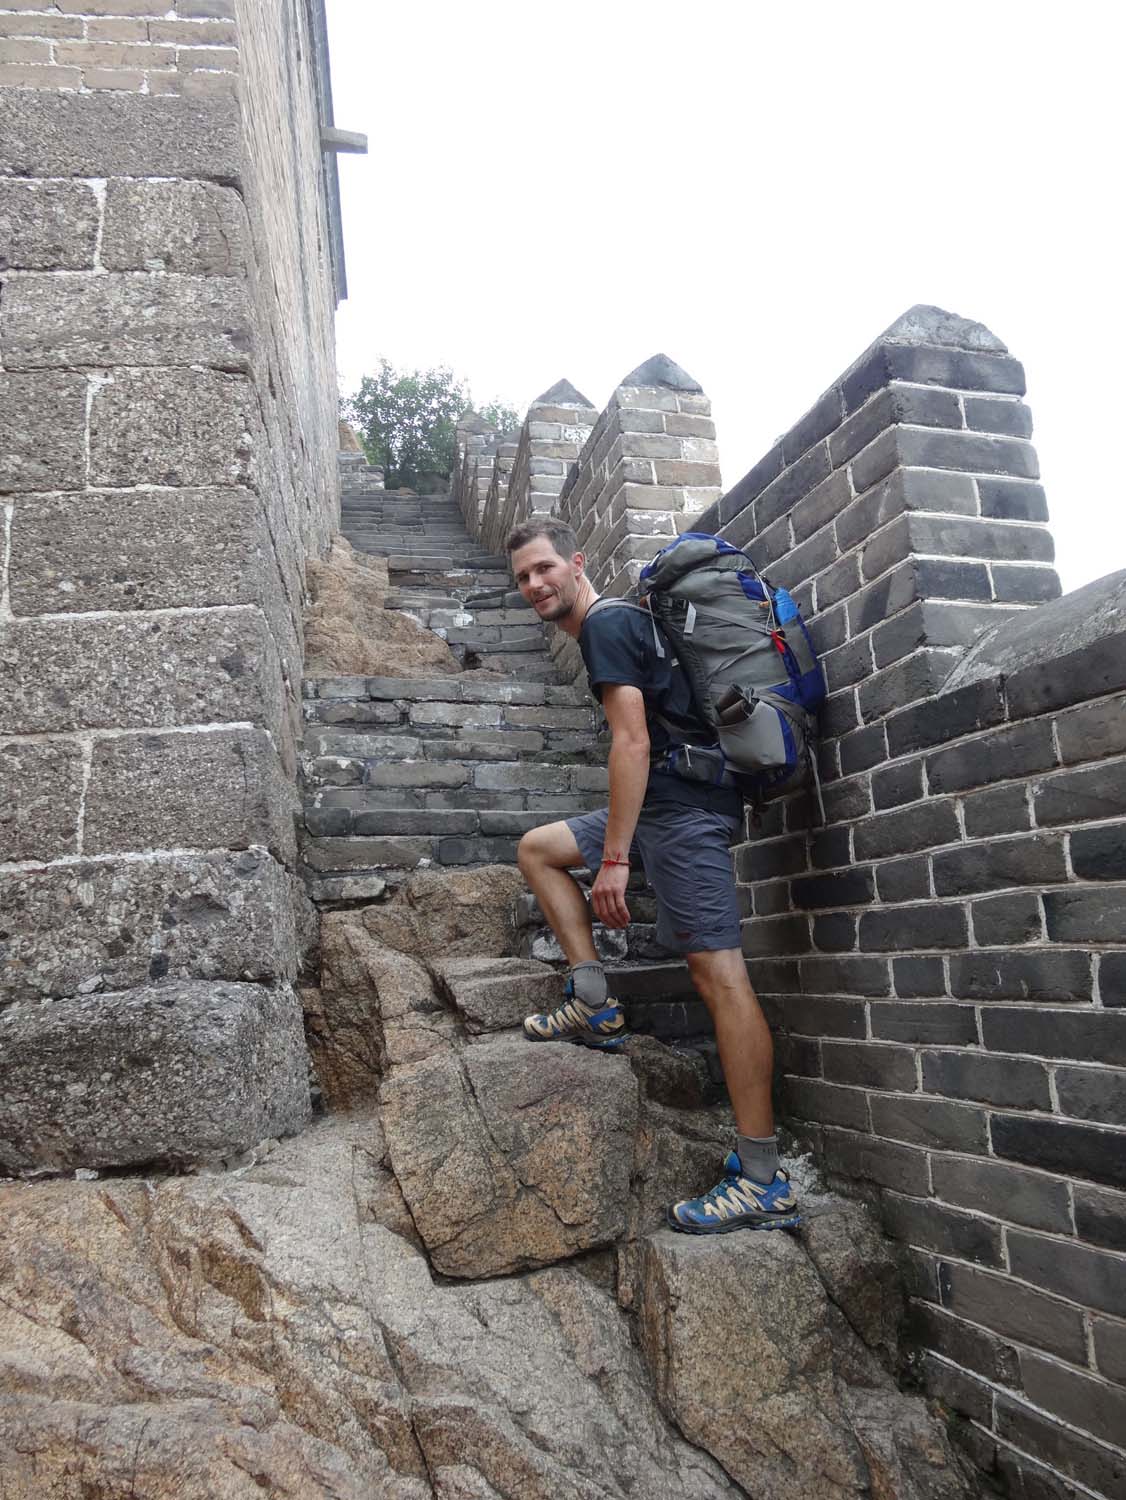 Every step is different on the Great Wall.